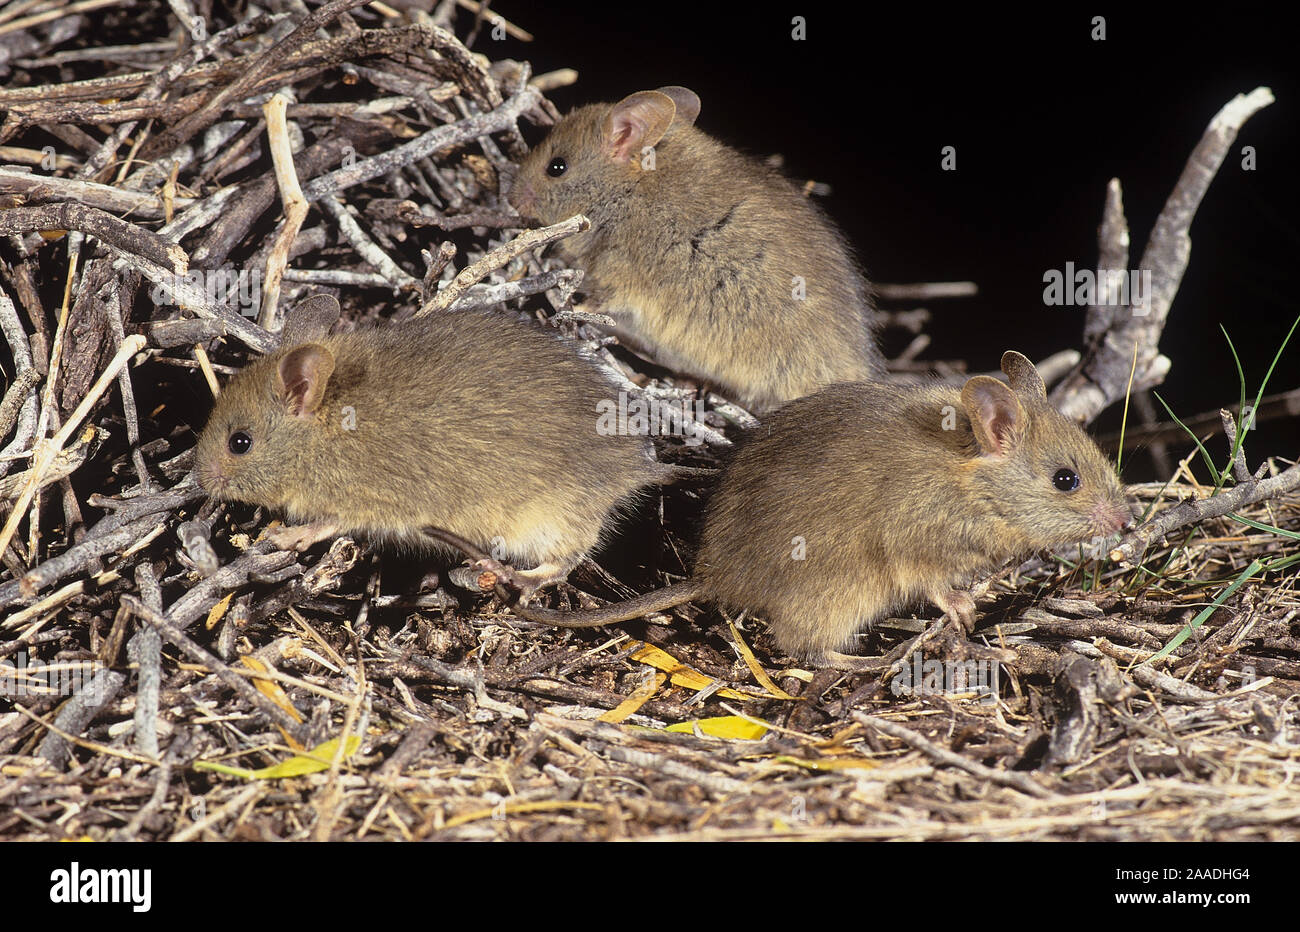 Greater stick-nest rat (Leporillus conditor) group of three,, Shark Bay UNESCO Natural World Heritage Site, Western Australia. Endangered species reintroduced to Shark Bay. Stock Photo